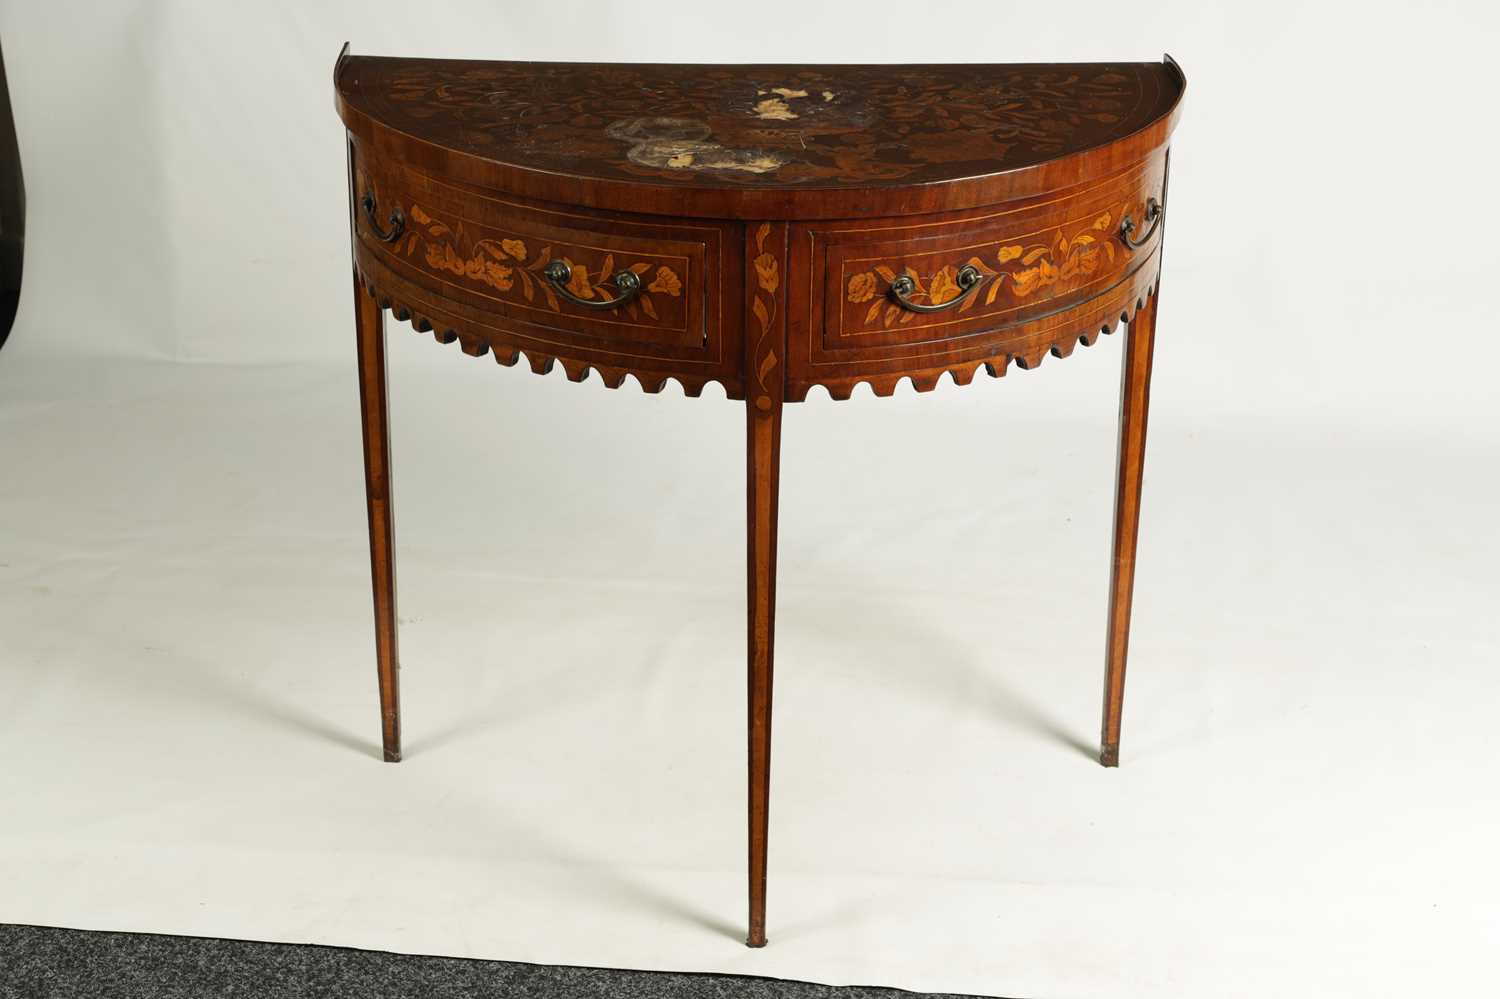 AN 18TH CENTURY BOW-FRONT DUTCH FLORAL MARQUETRY AND WALNUT SIDE TABLE - Image 2 of 10